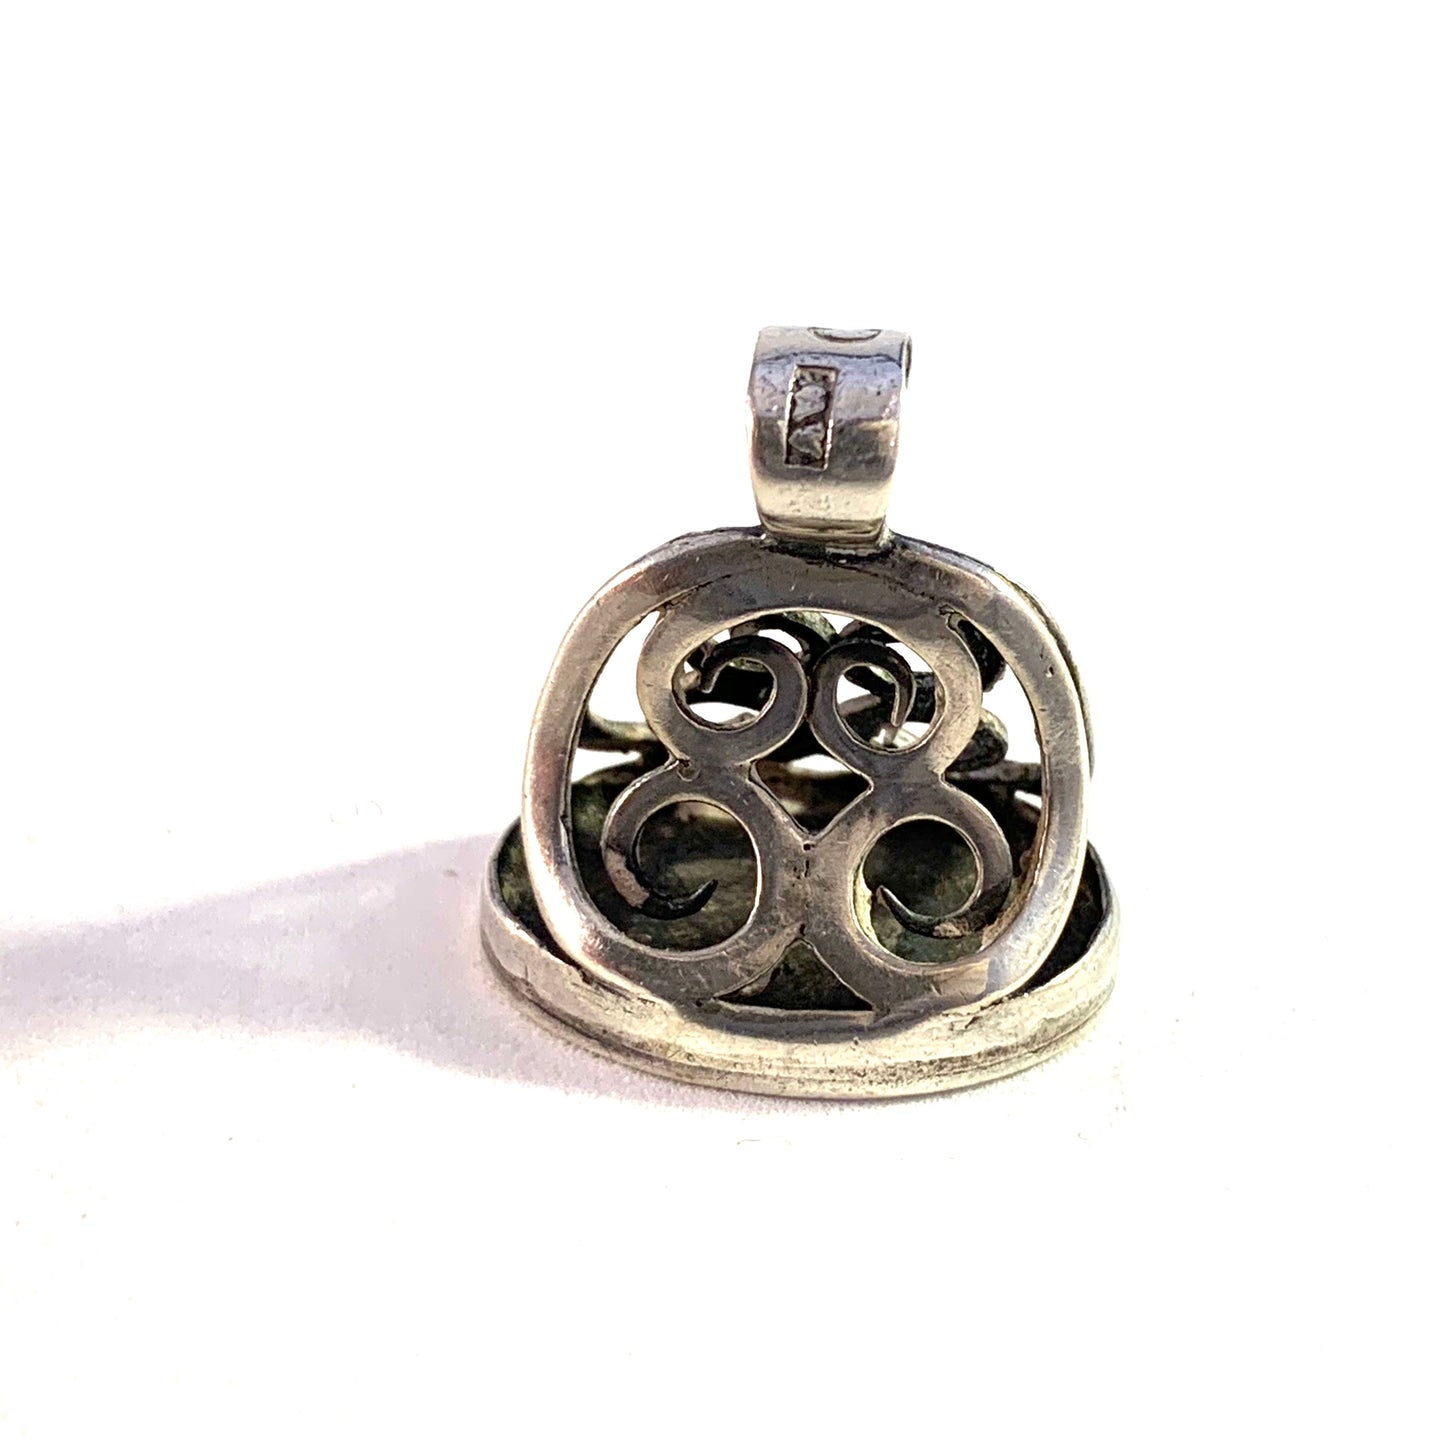 A Westberg, Sweden 1848 Early Victorian Solid Silver Fob Seal Pendant